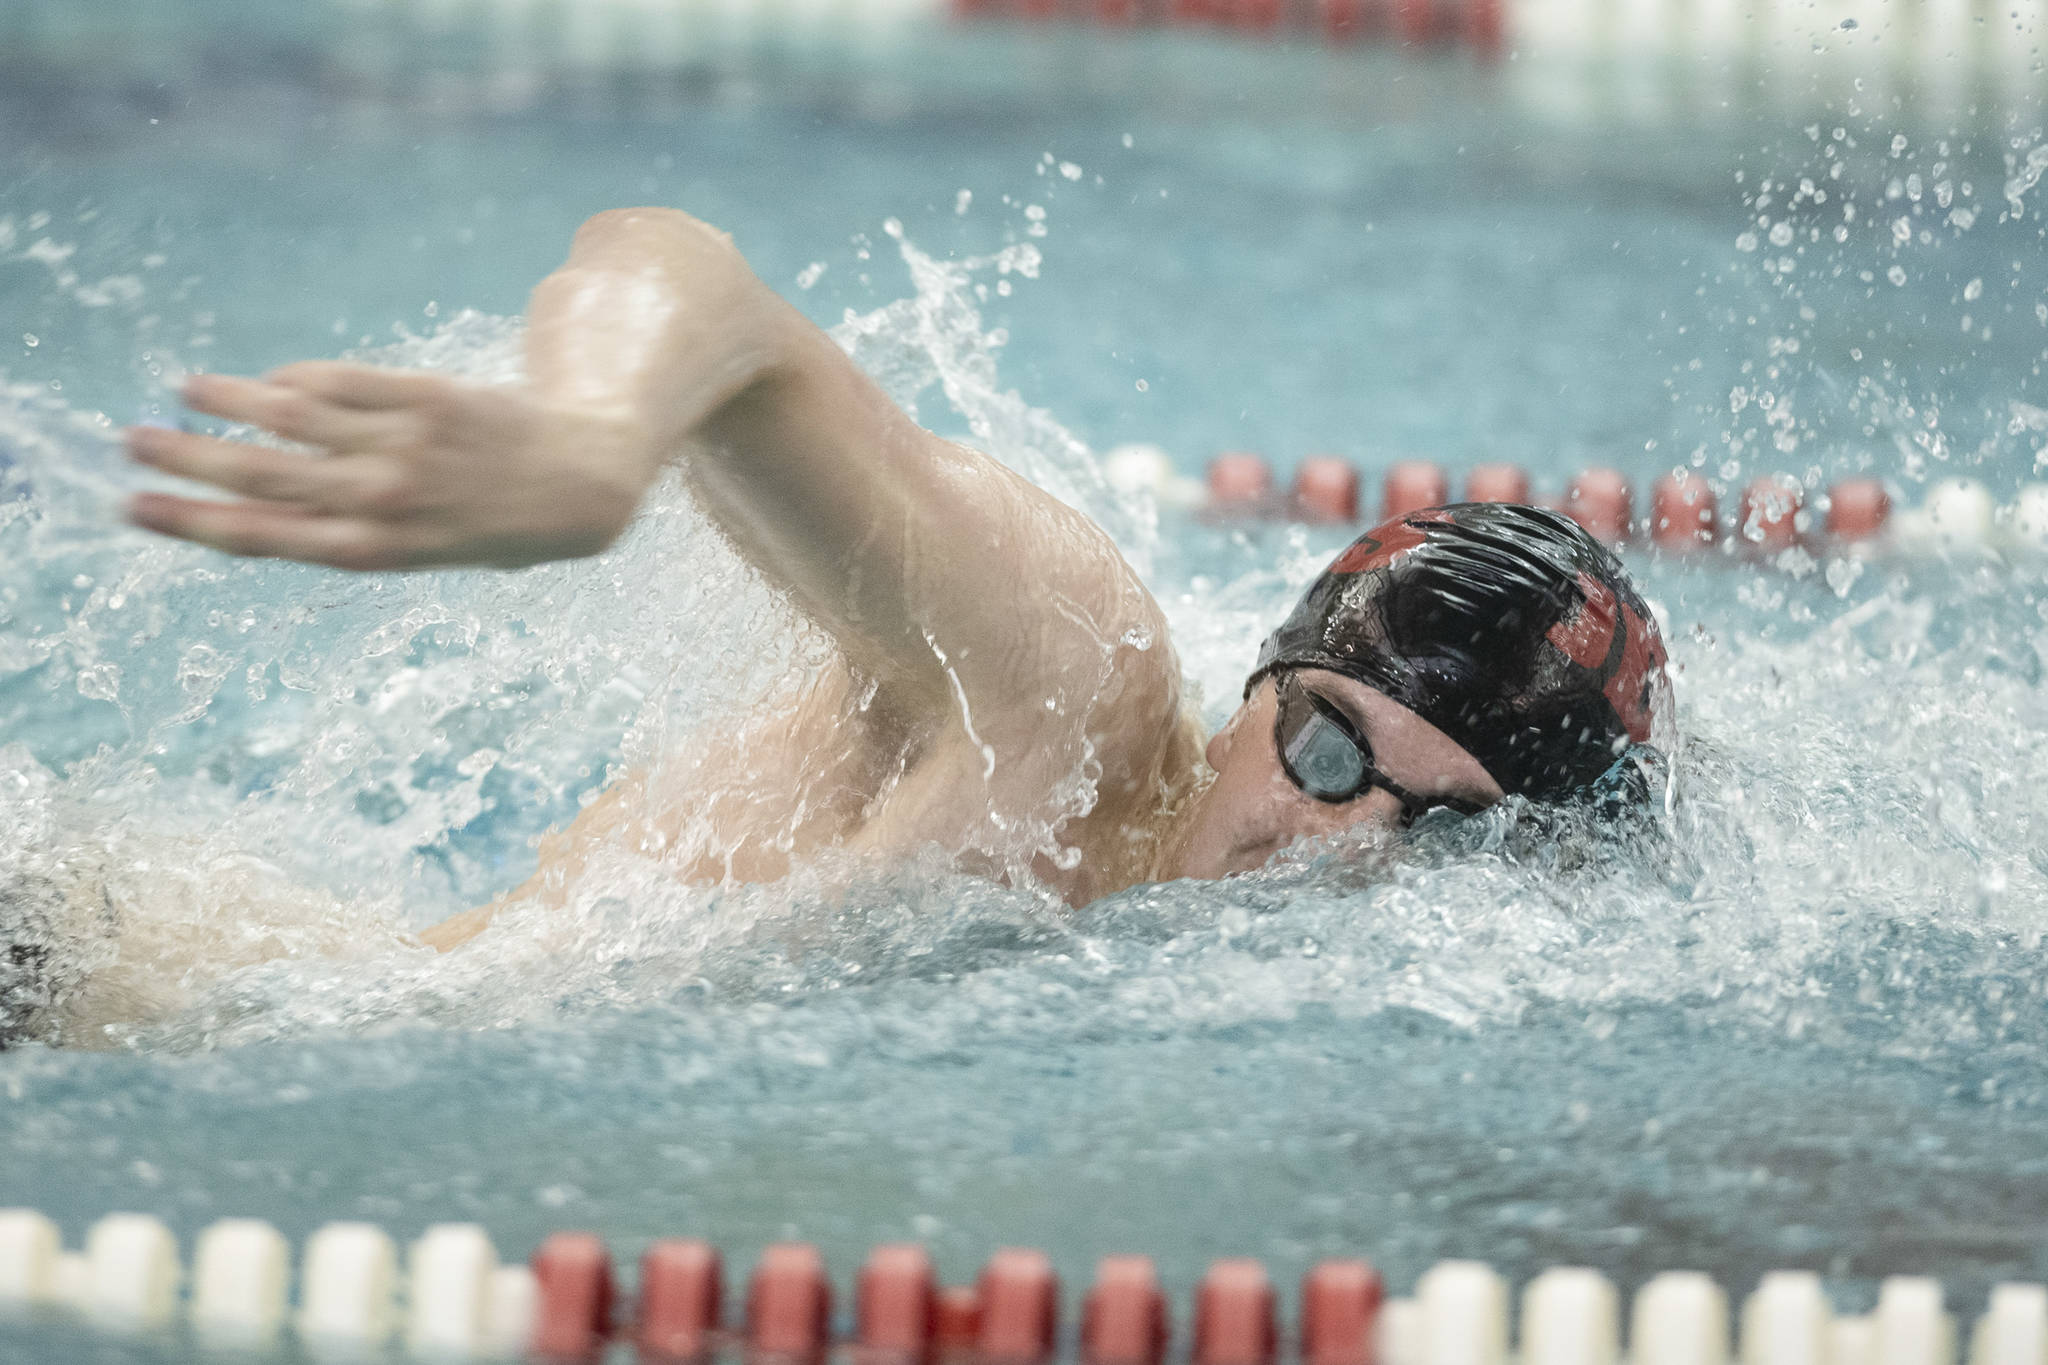 Caleb Peimann competes in the 50 Yard Freestyle at the Juneau Invitational Swim Meet at the Dimond Park Aquatic Center on Friday, Sept. 20, 2019. (Michael Penn | Juneau Empire)